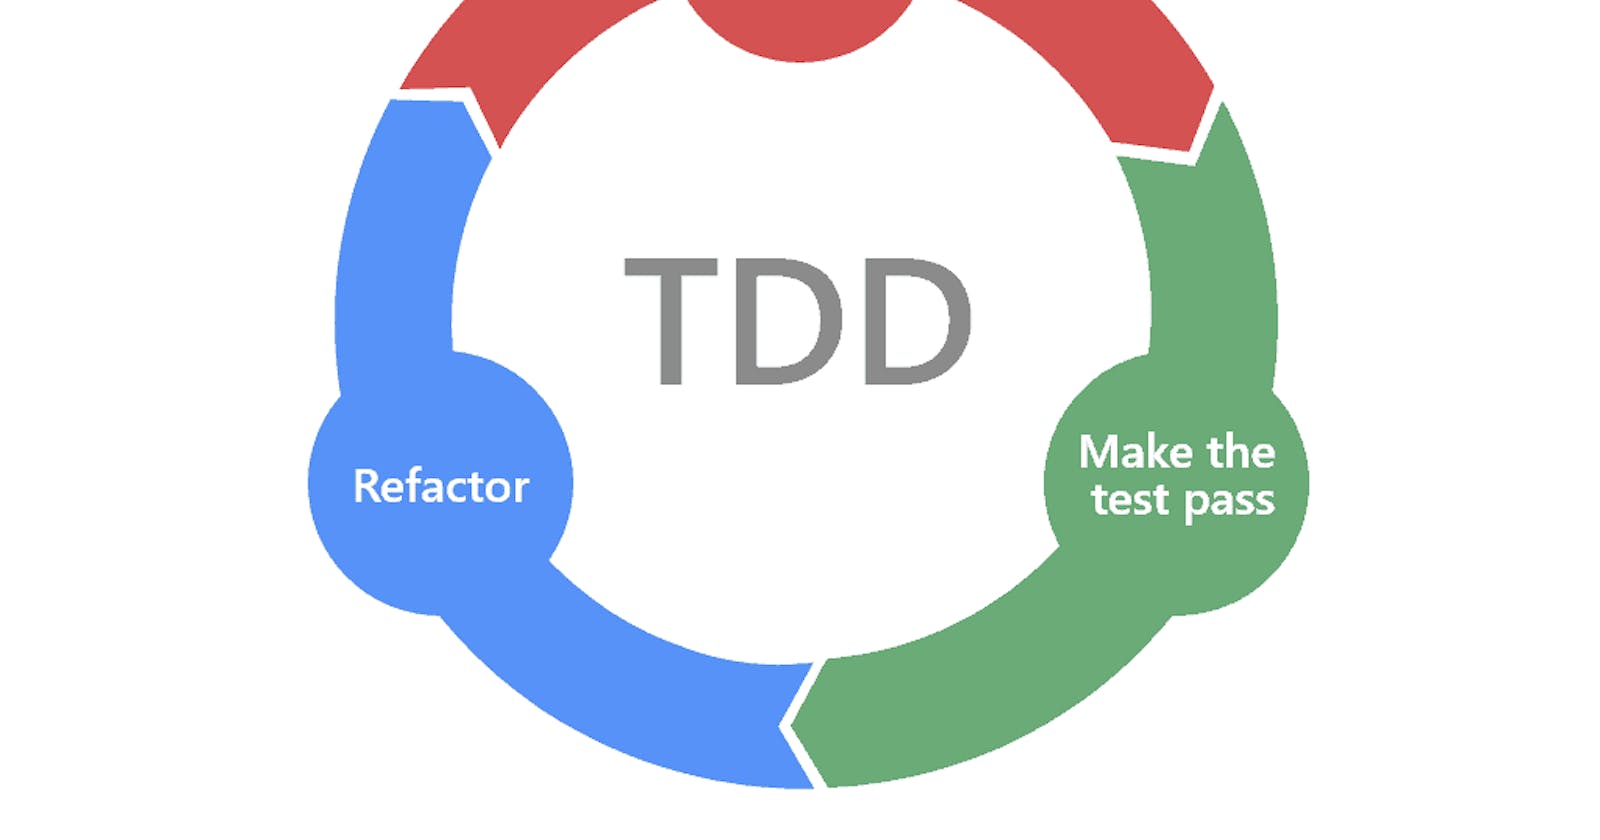 The Red Green Refactor of TDD